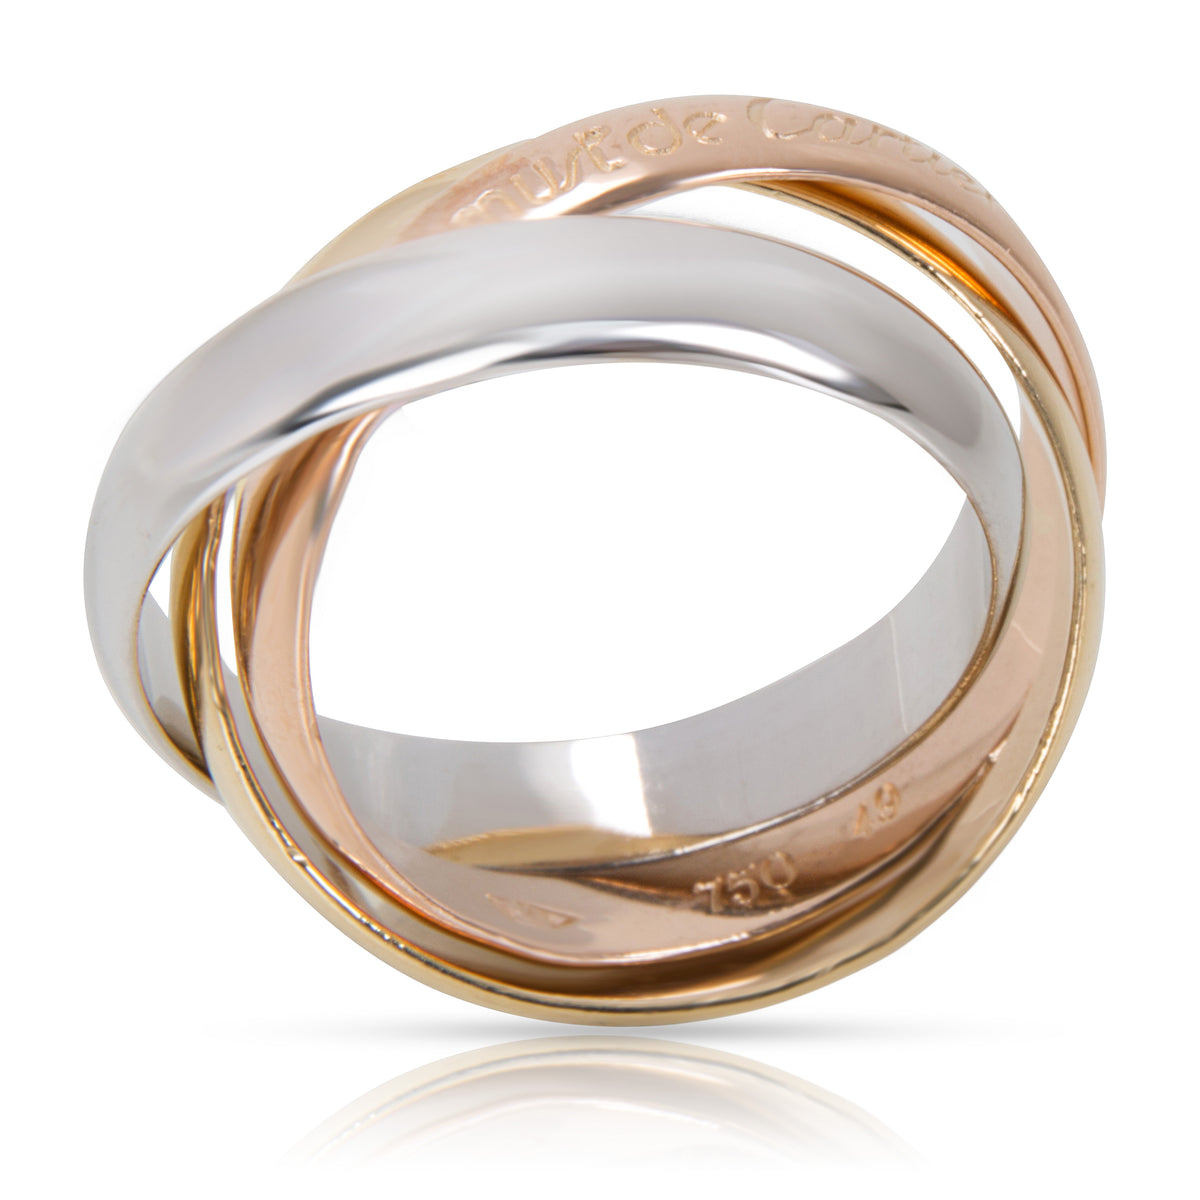 Cartier Le Must De Cartier Trinity Ring in 18K Yellow, White & Rose Gold